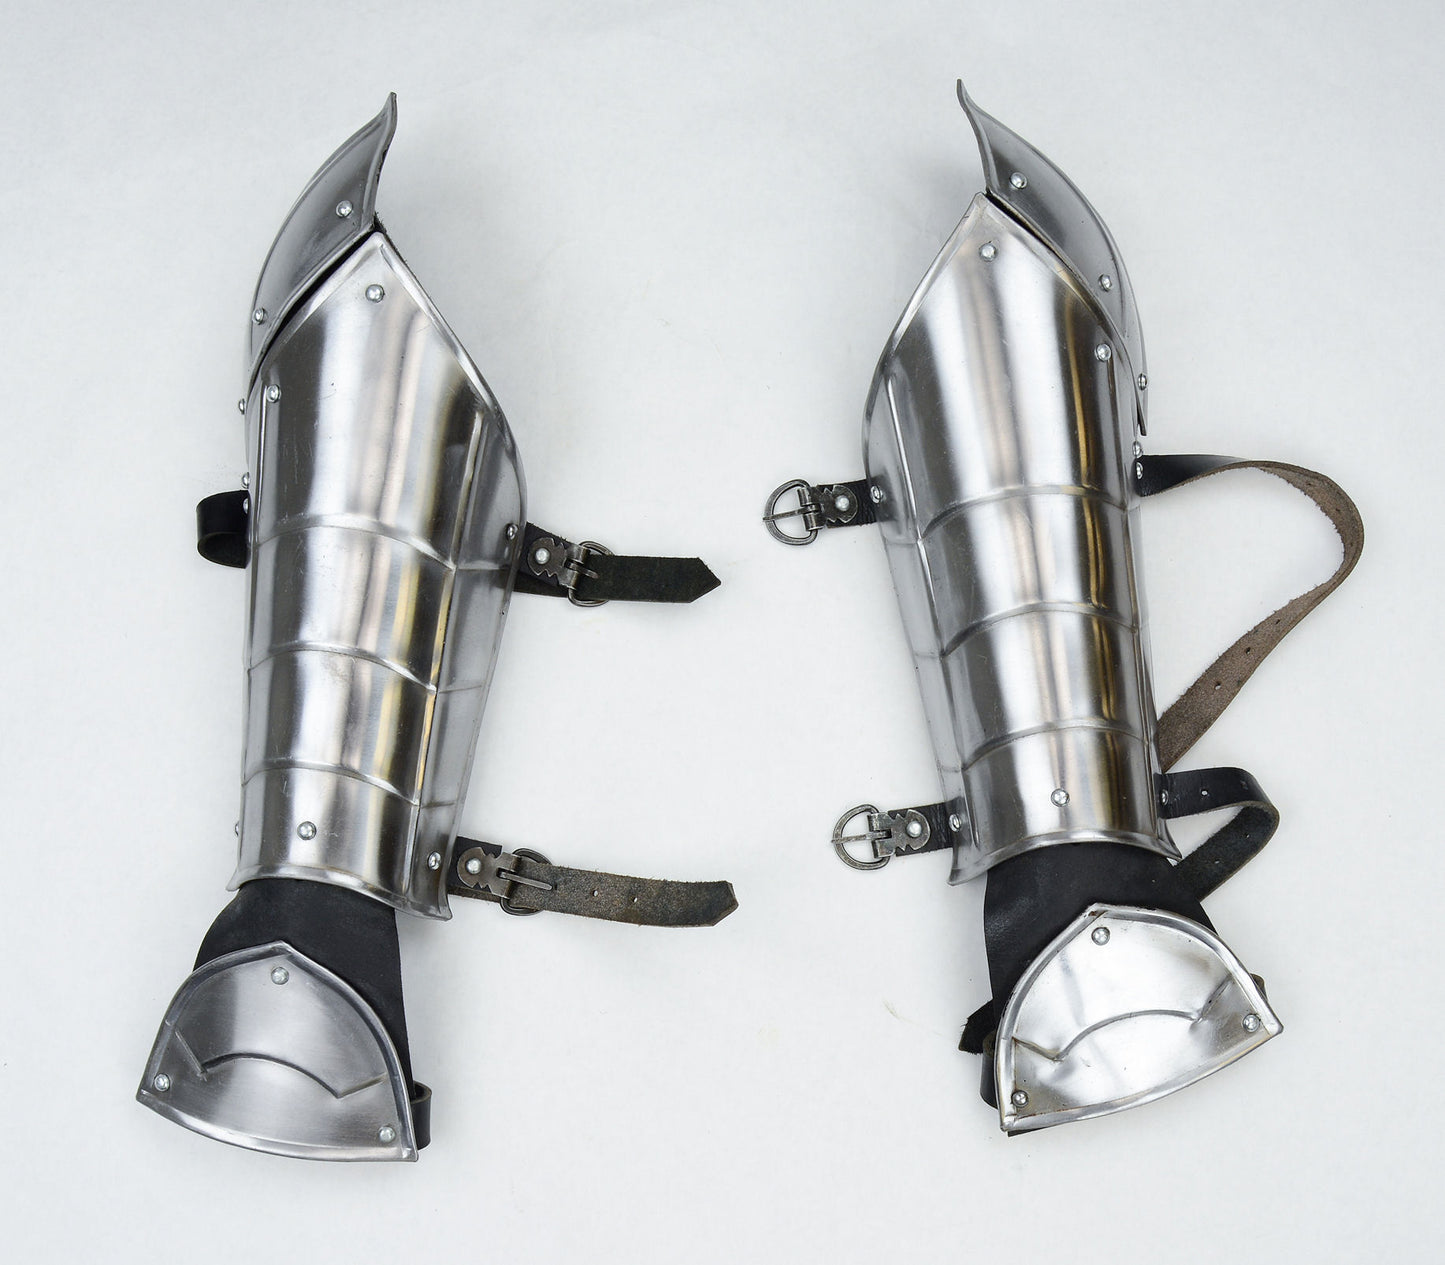 Bracers with Hand and Elbow Armor - 18 Gauge Steel